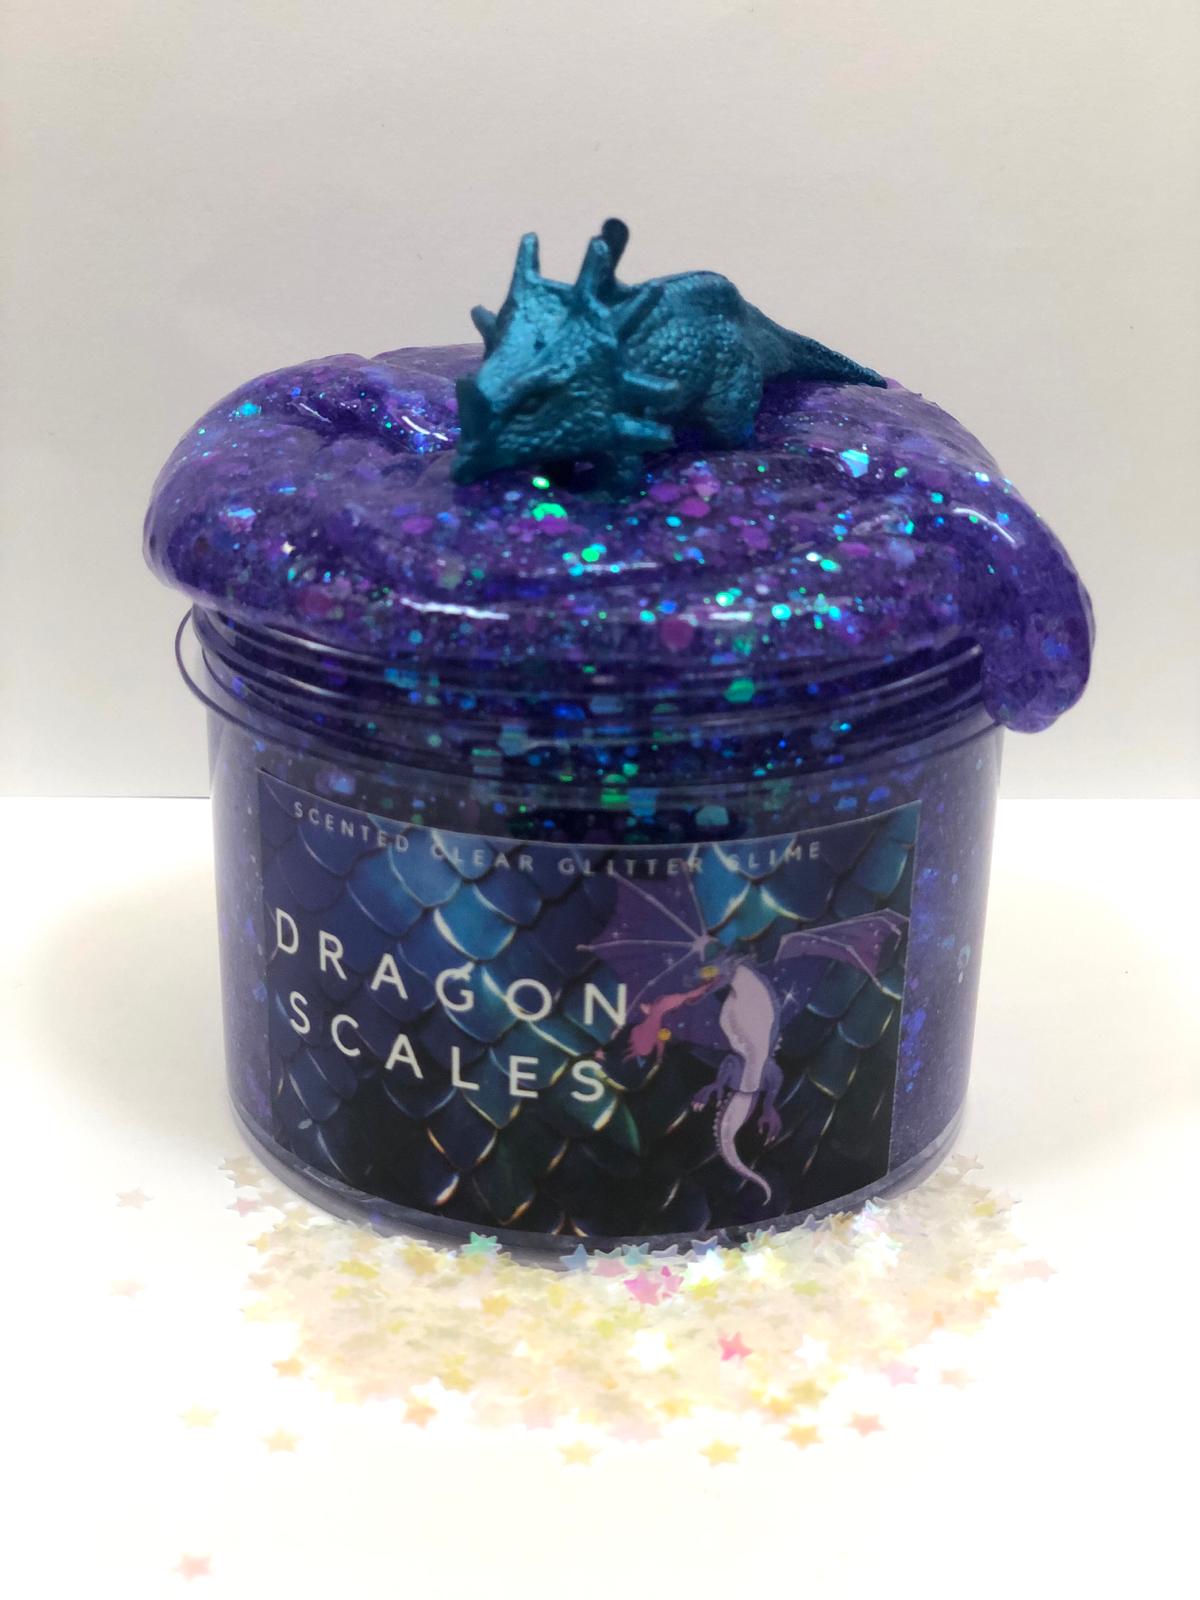  dragon-scales-slime